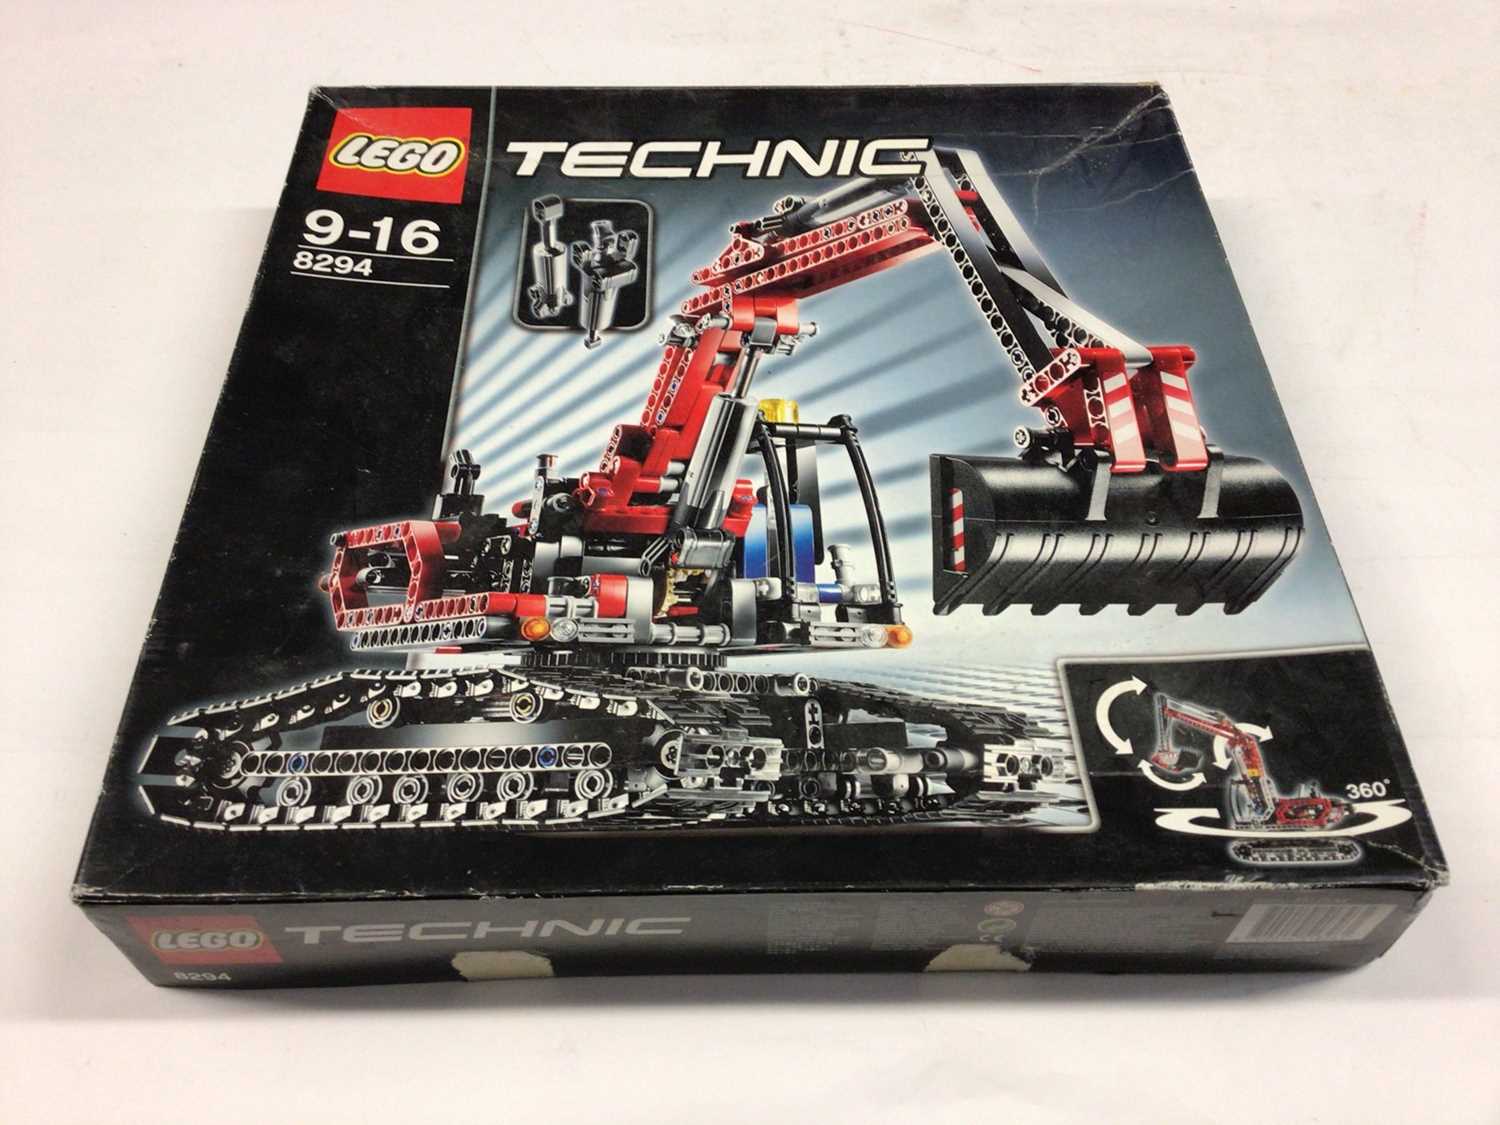 Lot 51 - Lego Technic 8294 Excavator with instructions, Boxed